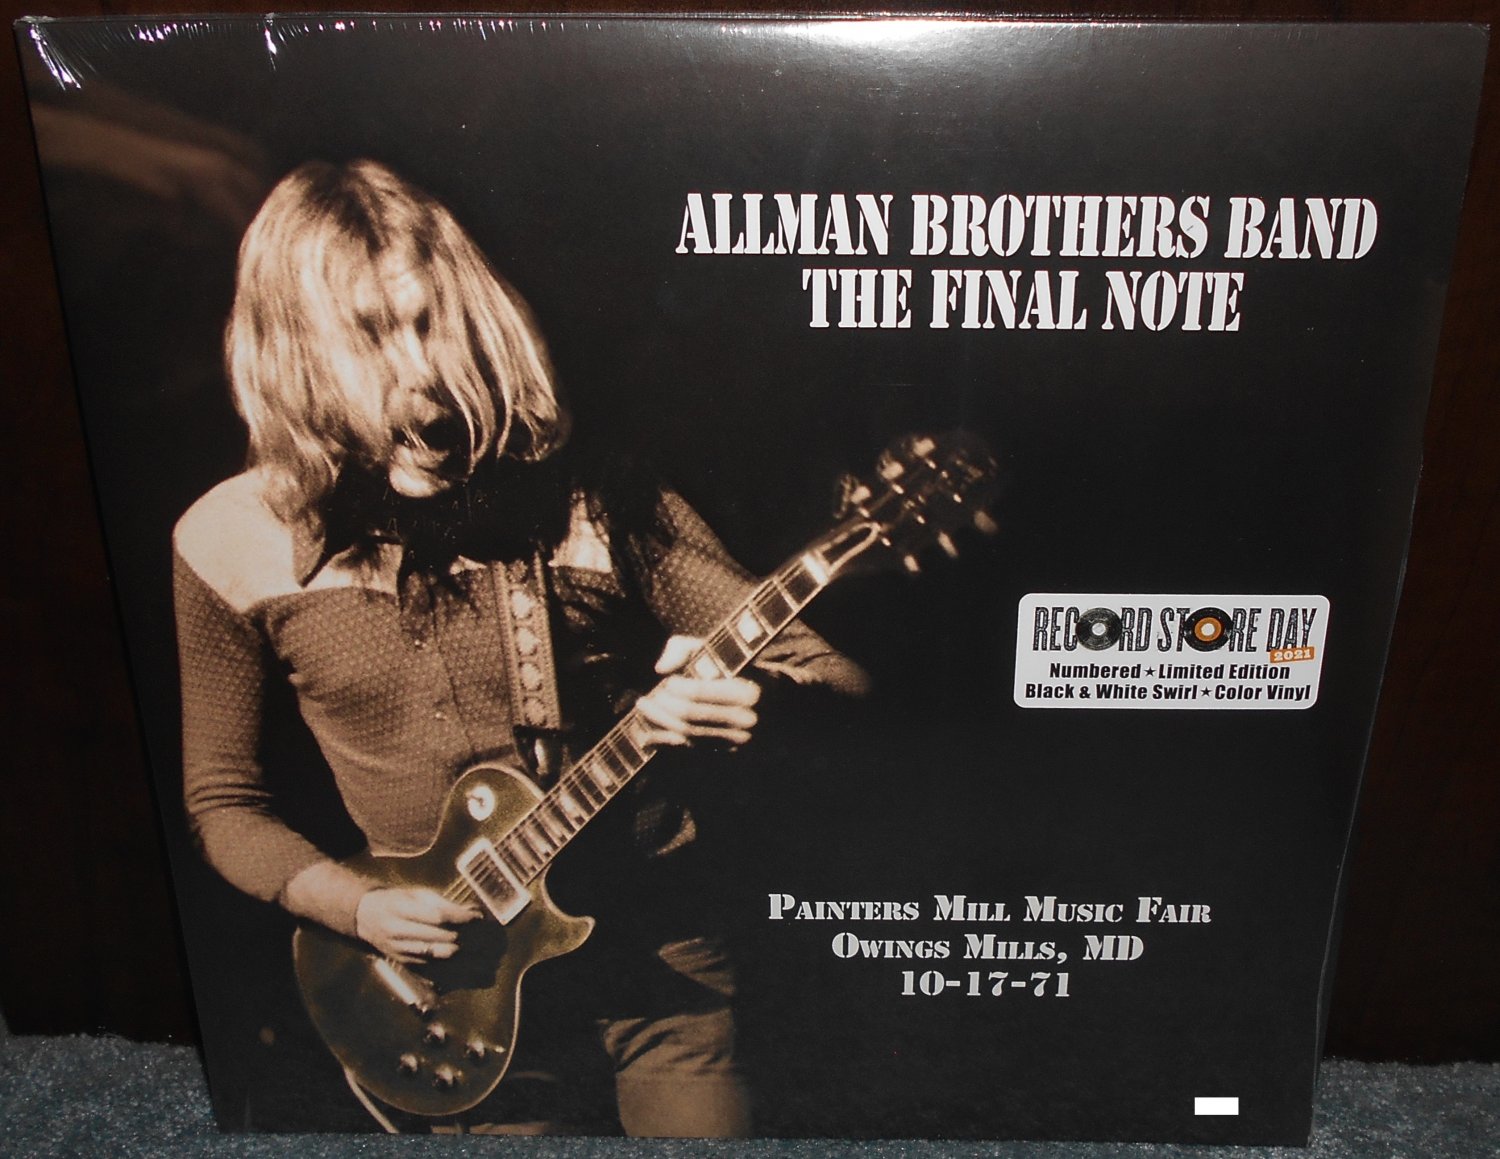 Allman Brothers Band The Final Note 2-LP Black White Swirl Vinyl RSD 2021 SEALED